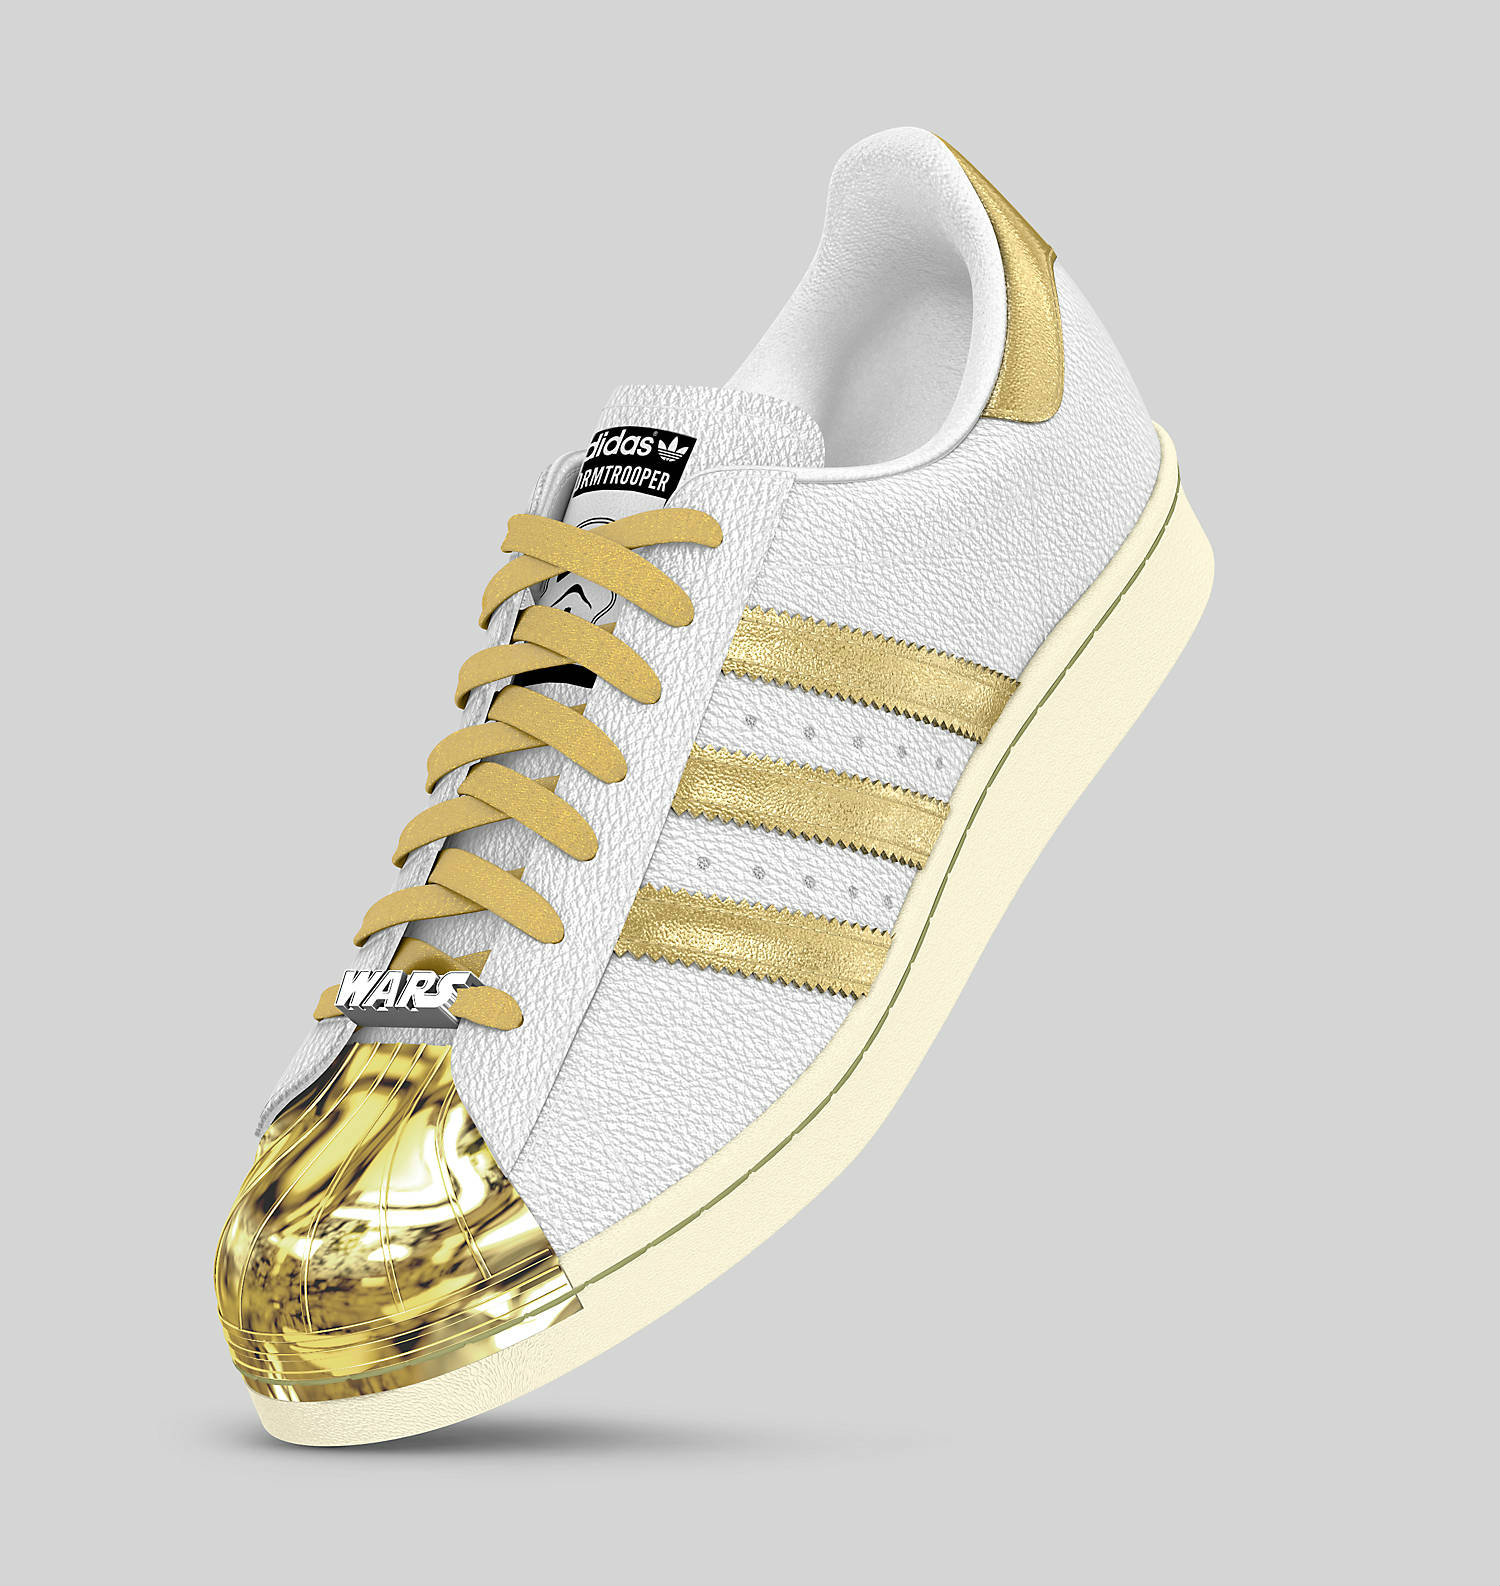 adidas chaussure couleur